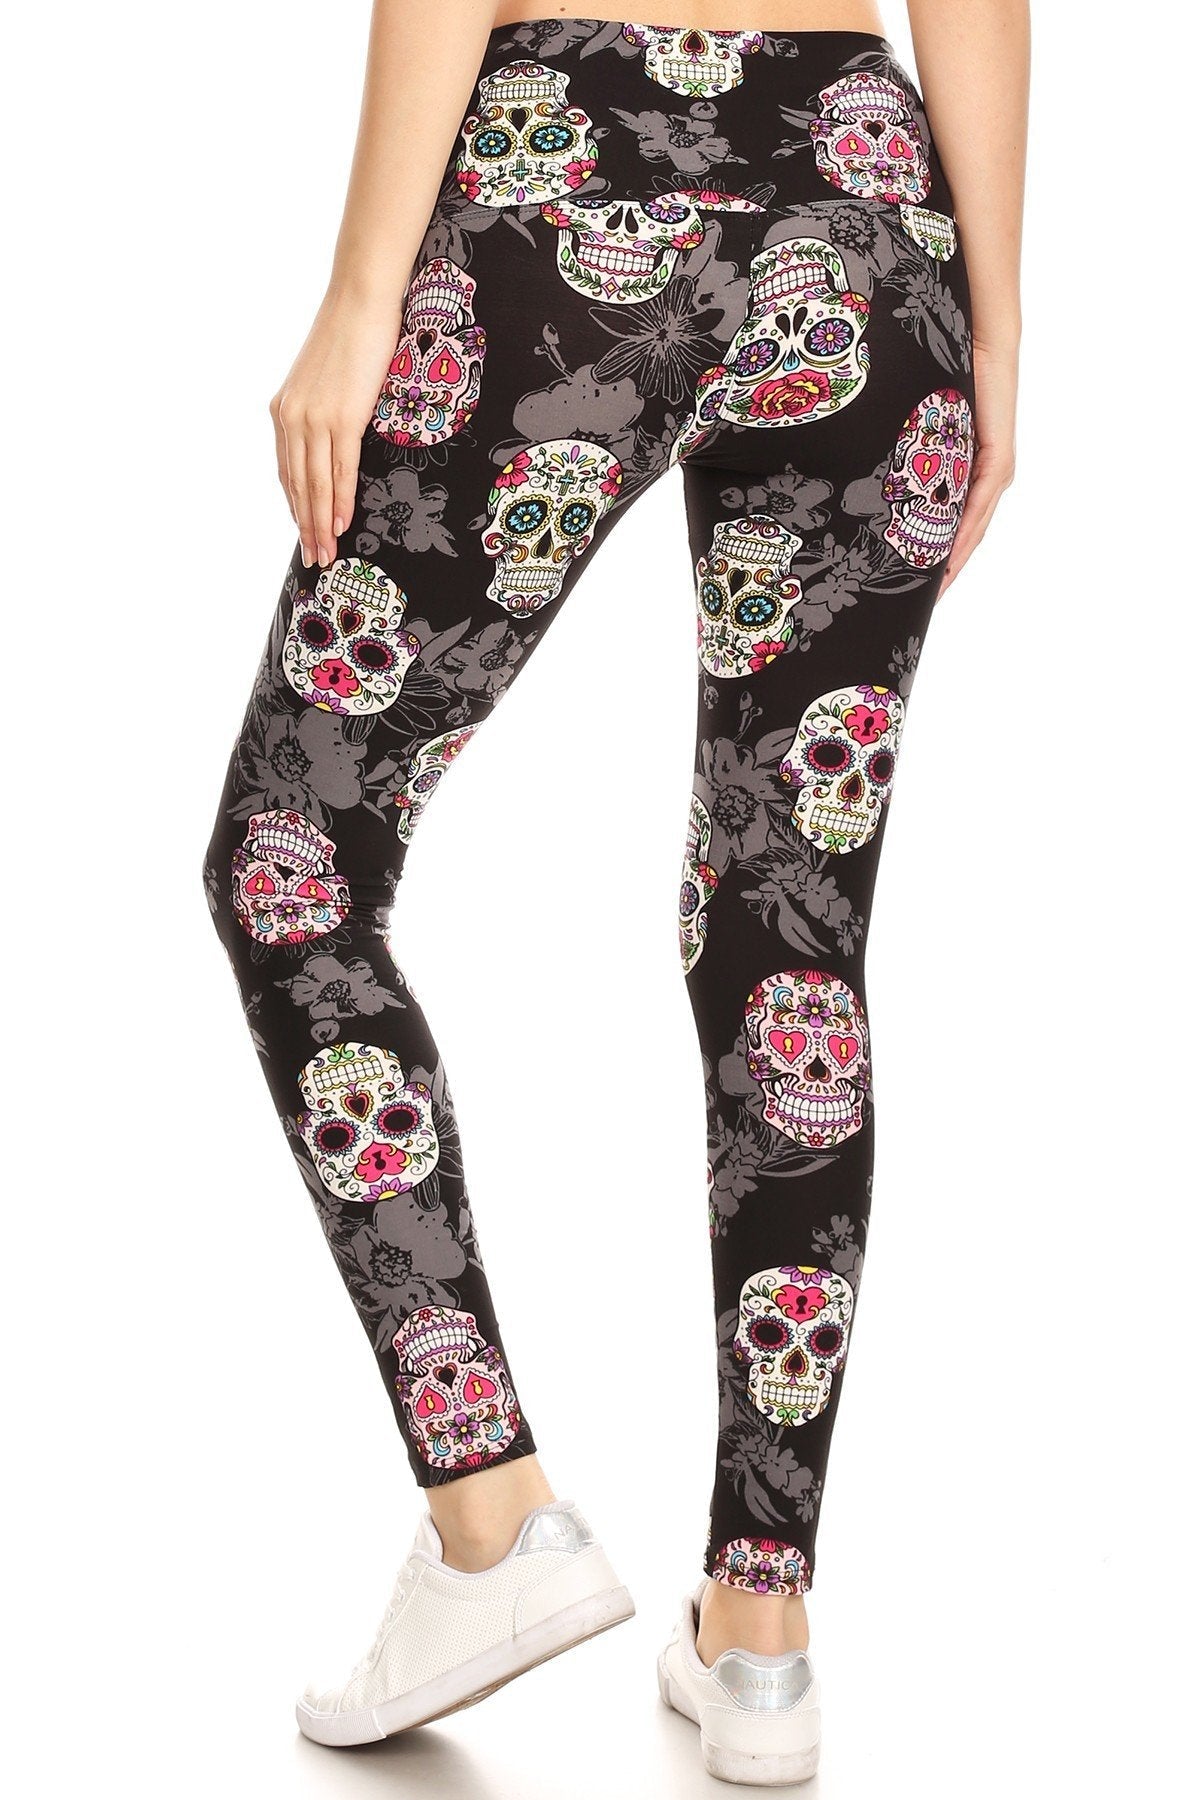 5-inch Long Yoga Style Banded Lined Skull Printed Knit Legging With High Waist - Fashion Quality Boutik